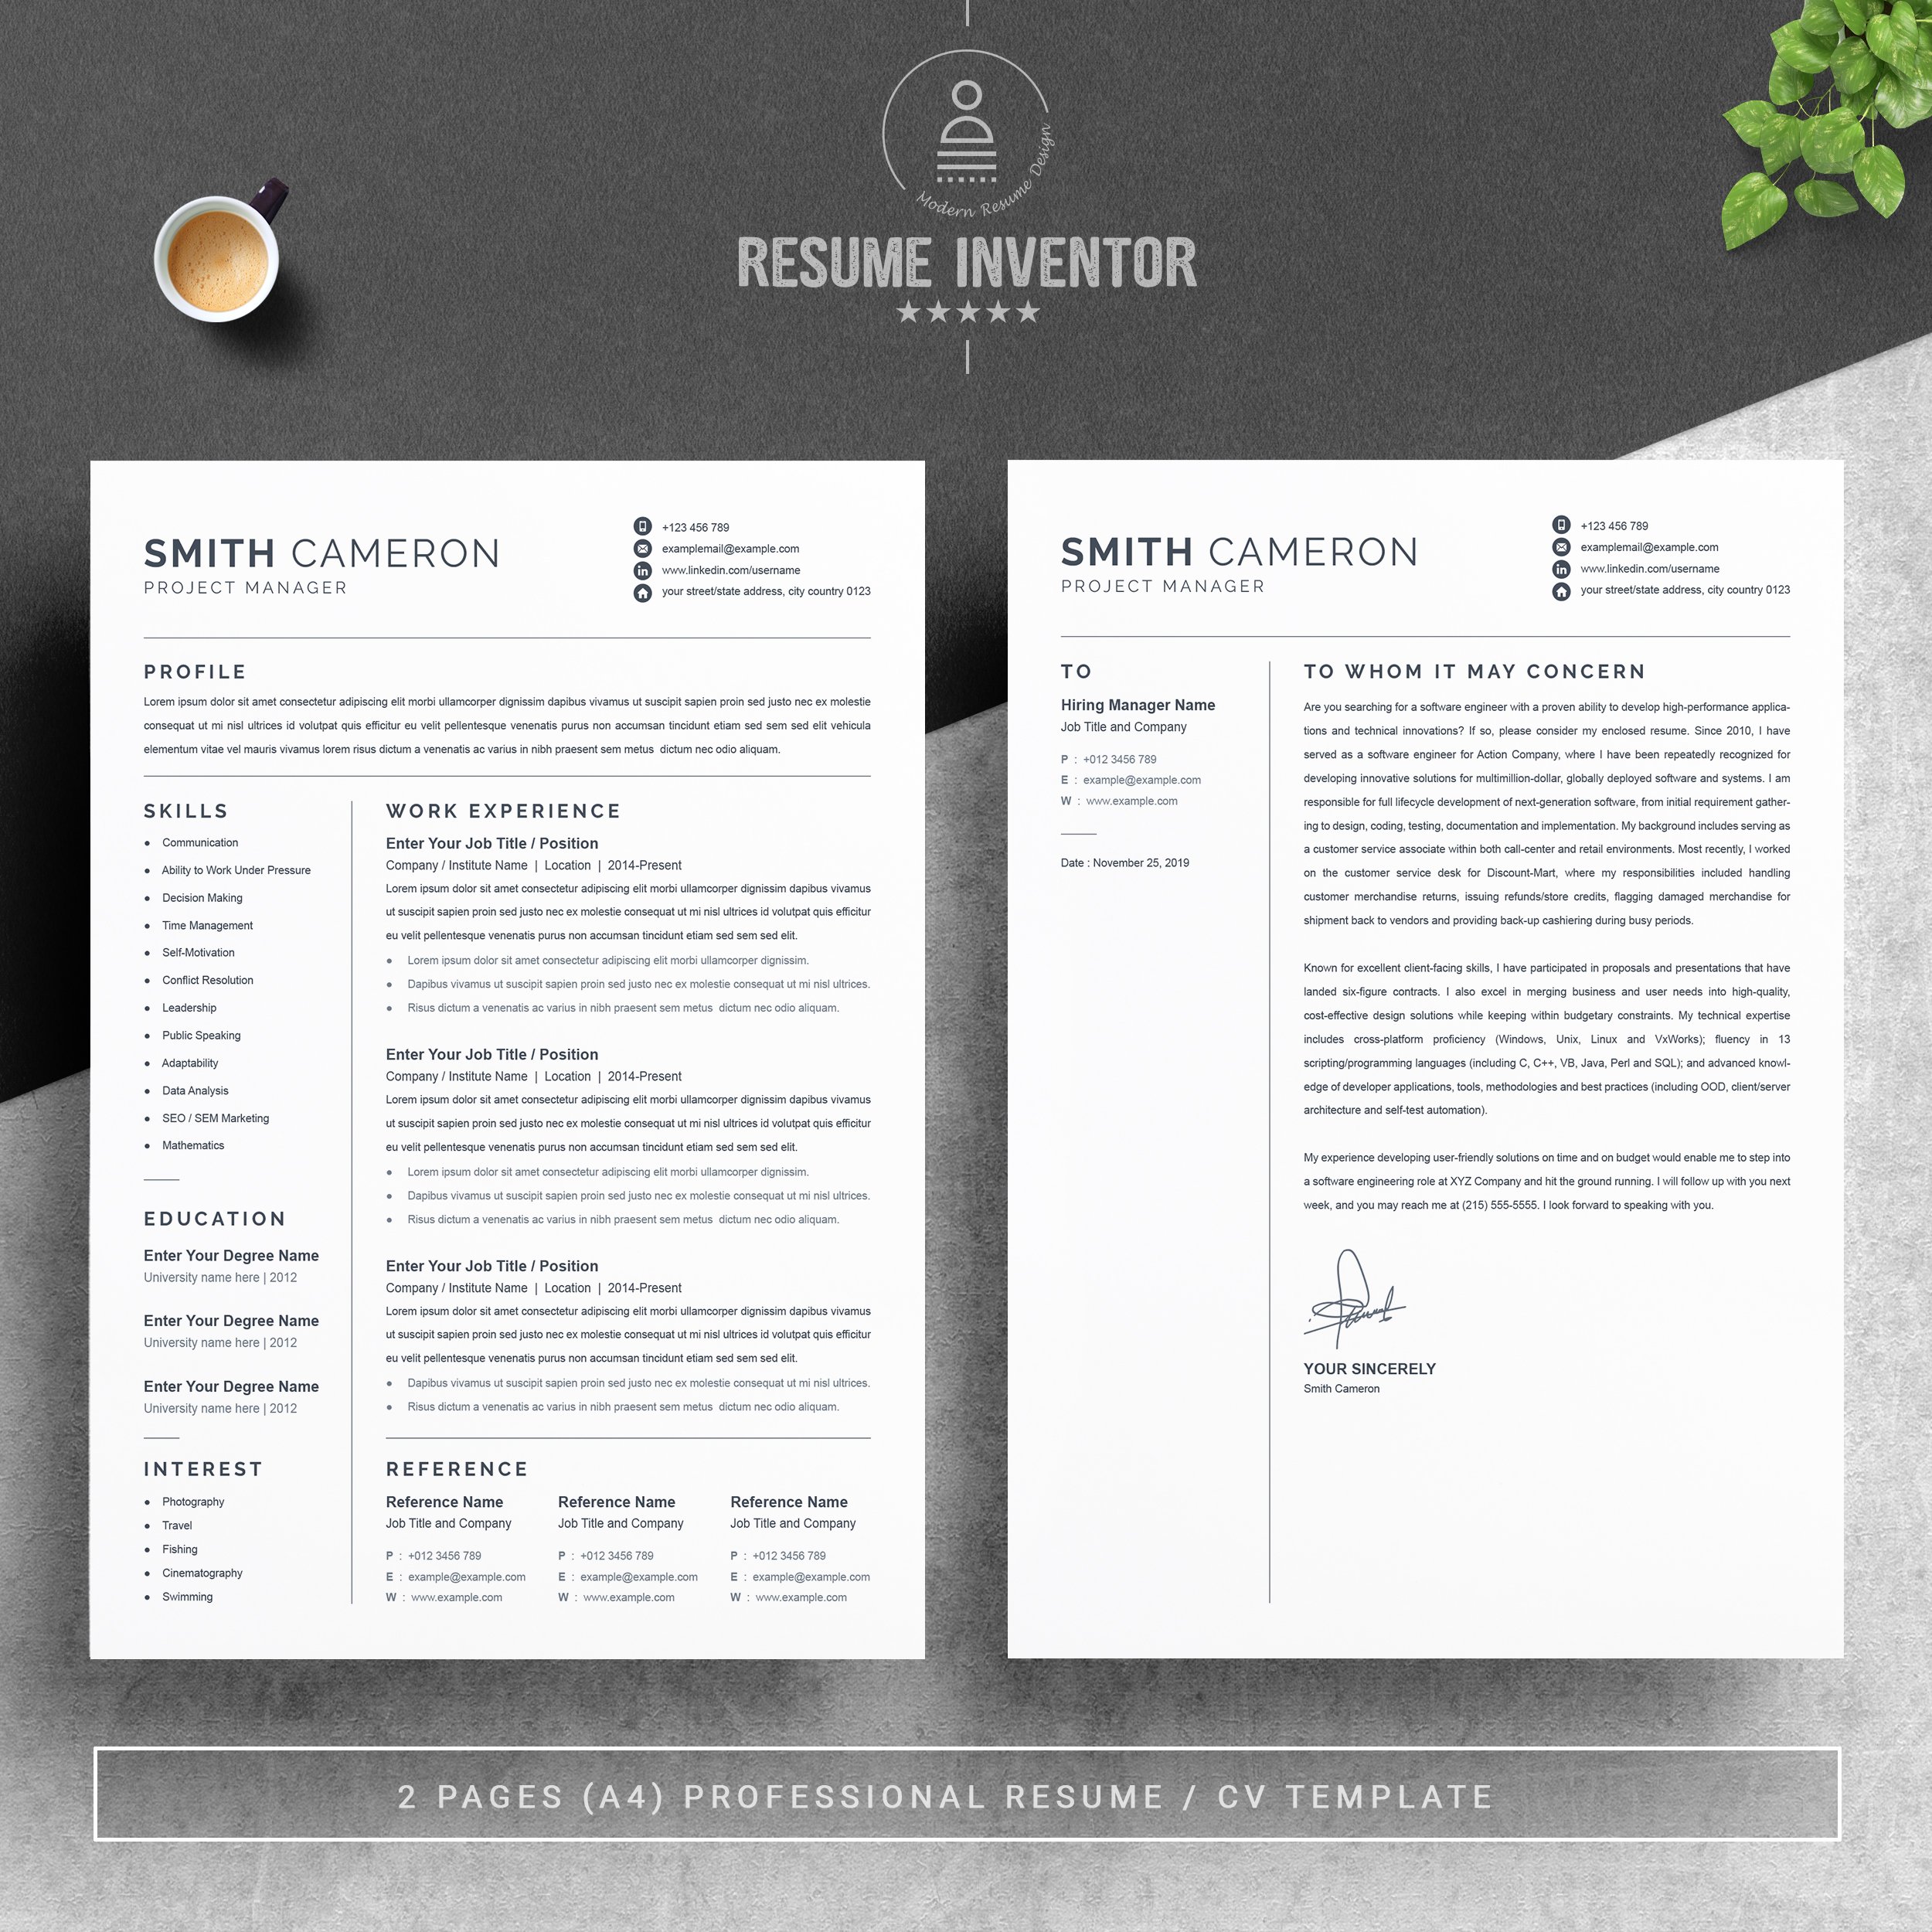 Minimalist Word Resume / CV Template preview image.